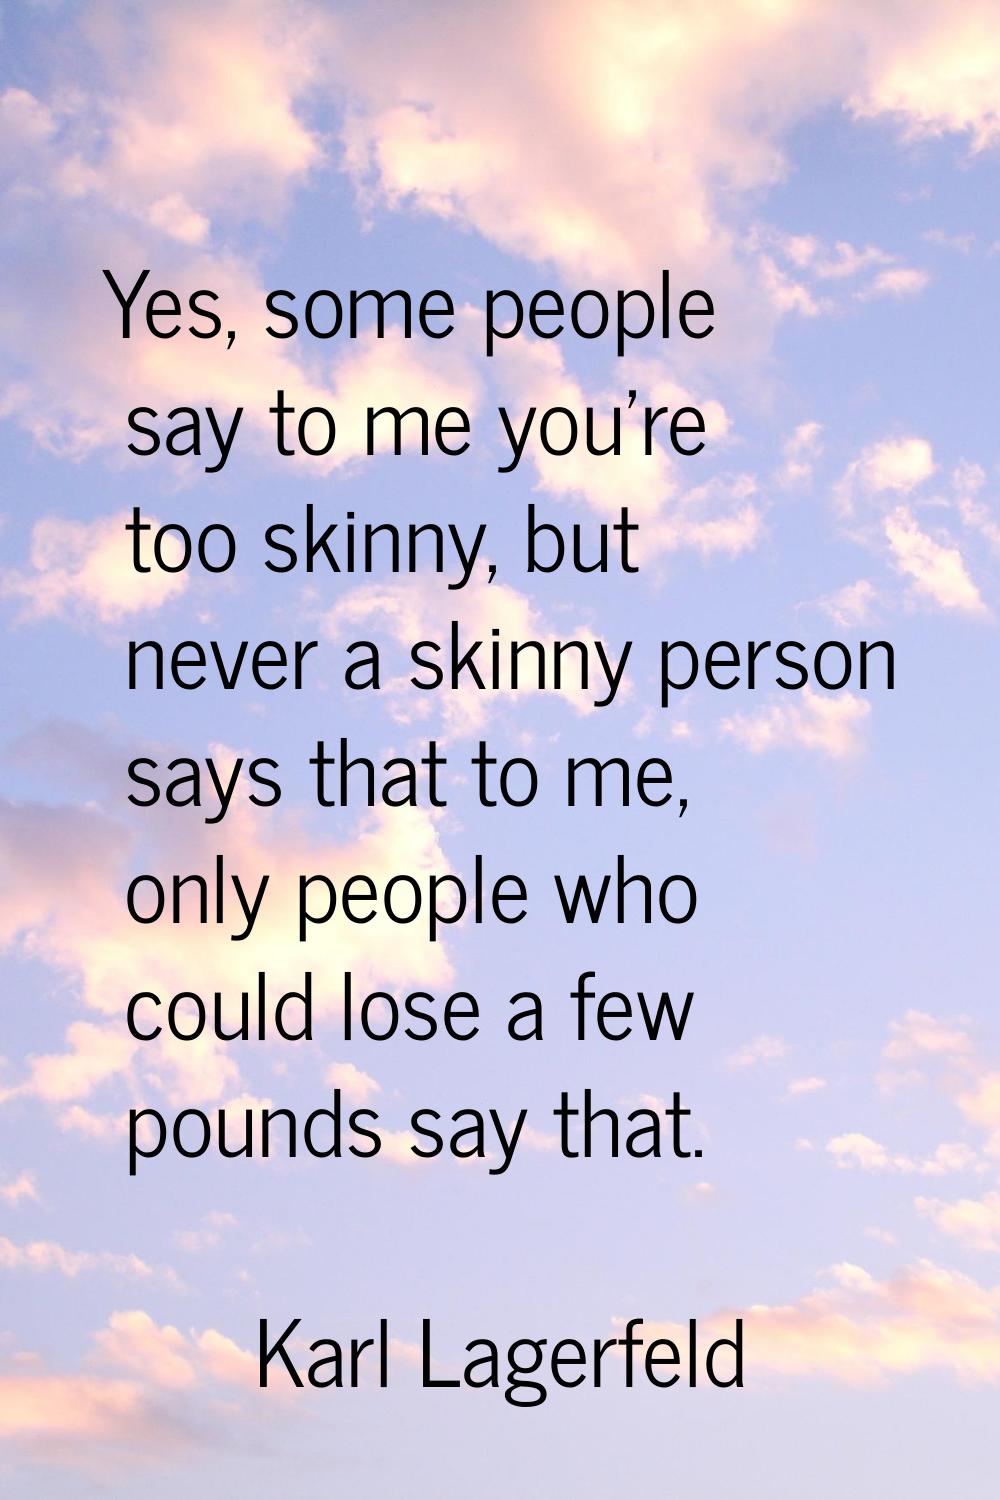 Yes, some people say to me you're too skinny, but never a skinny person says that to me, only peopl